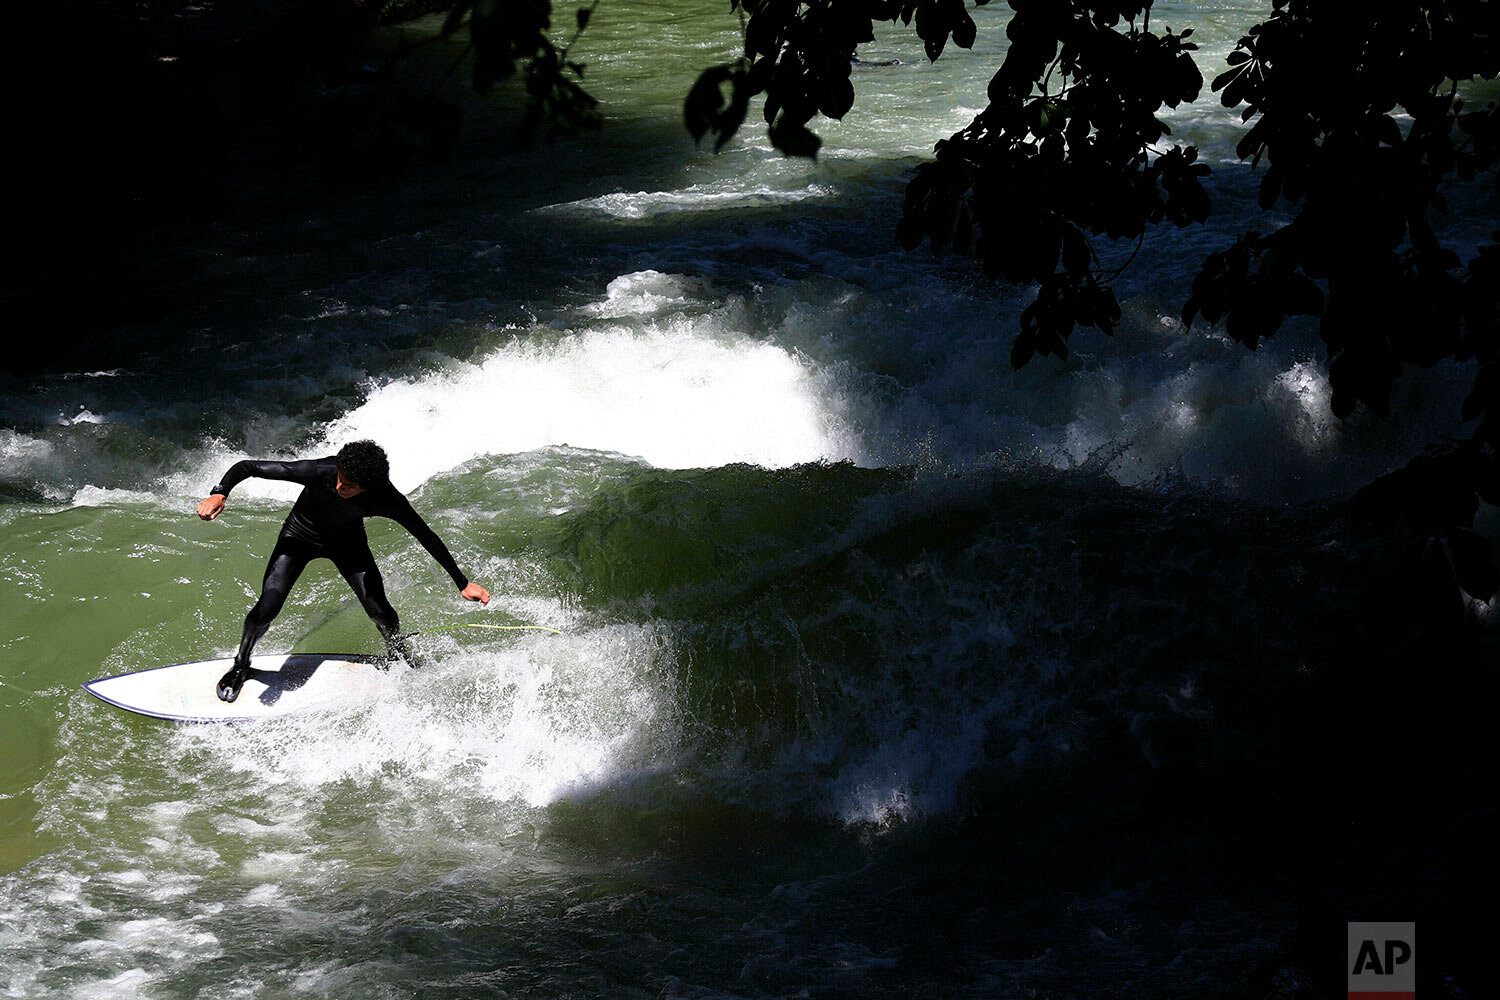  A surfer rides an artificial wave in the river "Eisbach" at the English Garden downtown in Munich, Germany, Monday, June 24, 2019. (AP Photo/Matthias Schrader) 